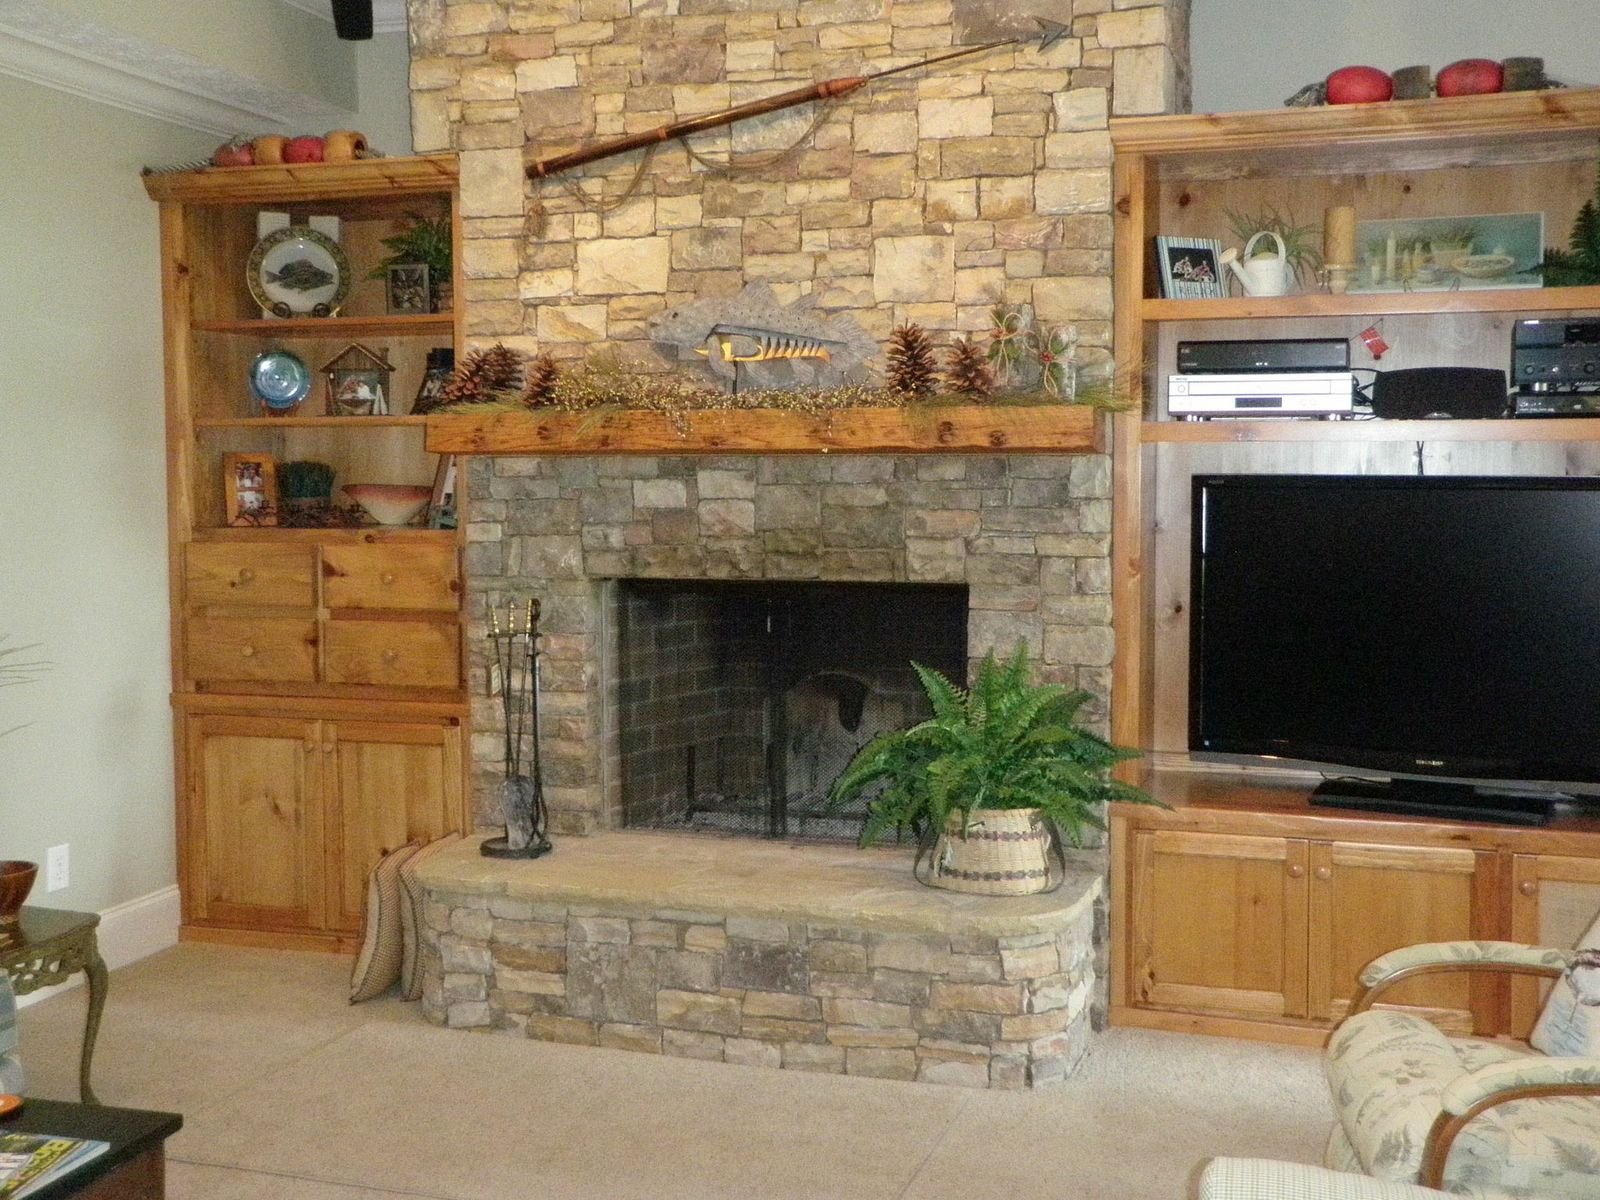 rustic living room decoration with shelves unit and stone fireplace ideas plus wood fireplace mantle also armchair ideas boral stone fireplace stone mantelpiece feature wall ideas living room with fir